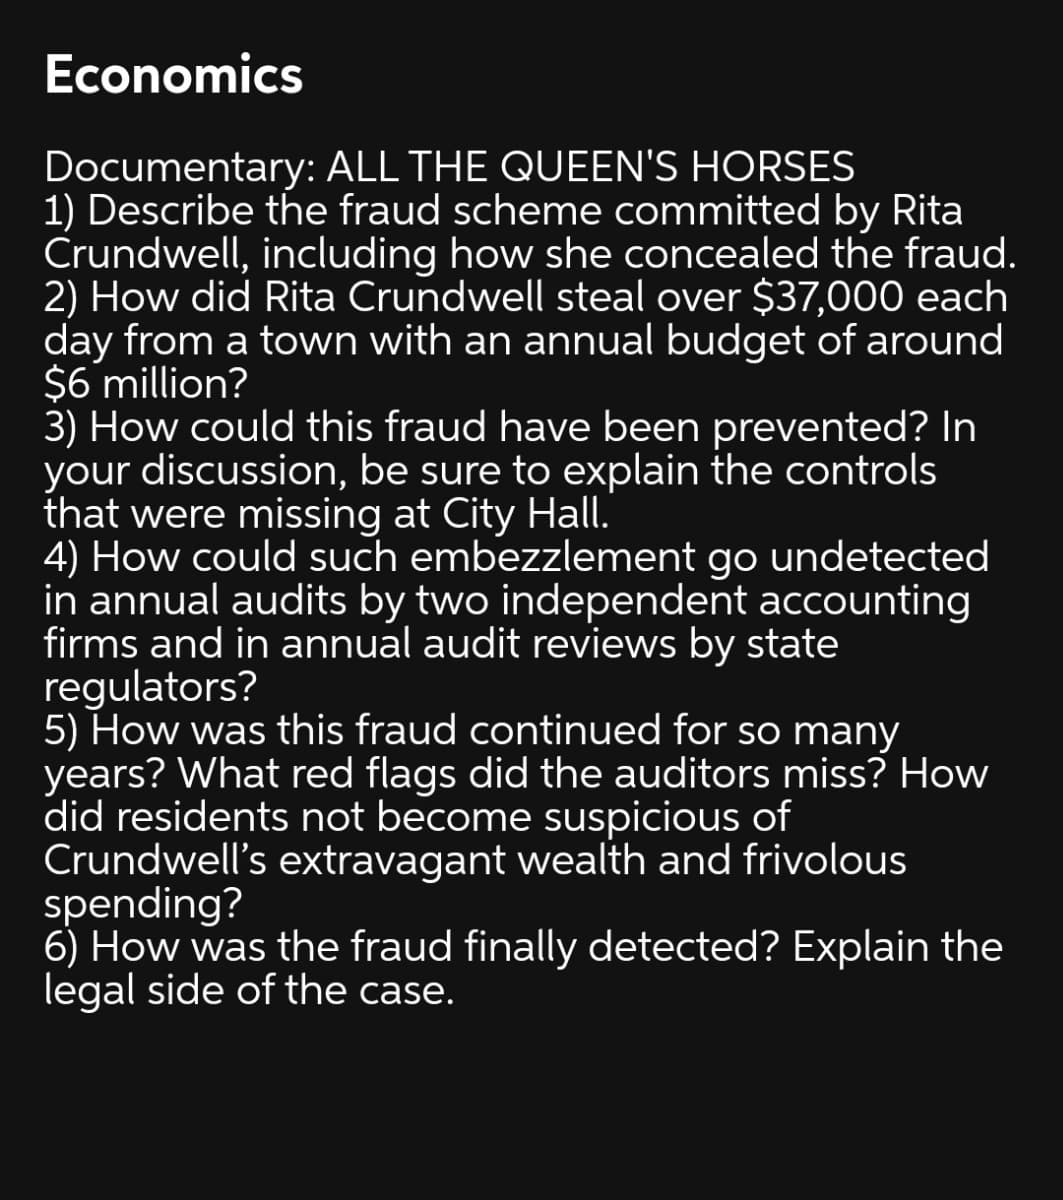 Economics
Documentary: ALL THE QUEEN'S HORSES
1) Describe the fraud scheme committed by Rita
Crundwell, including how she concealed the fraud.
2) How did Rita Crundwell steal over $37,000 each
day from a town with an annual budget of around
$6 million?
3) How could this fraud have been prevented? In
your discussion, be sure to explain the controls
that were missing at City Hall.
4) How could such embezzlement go undetected
in annual audits by two independent accounting
firms and in annual audit reviews by state
regulators?
5) How was this fraud continued for so many
years? What red flags did the auditors miss? How
did residents not become suspicious of
Crundwell's extravagant wealth and frivolous
spending?
6) How was the fraud finally detected? Explain the
legal side of the case.
